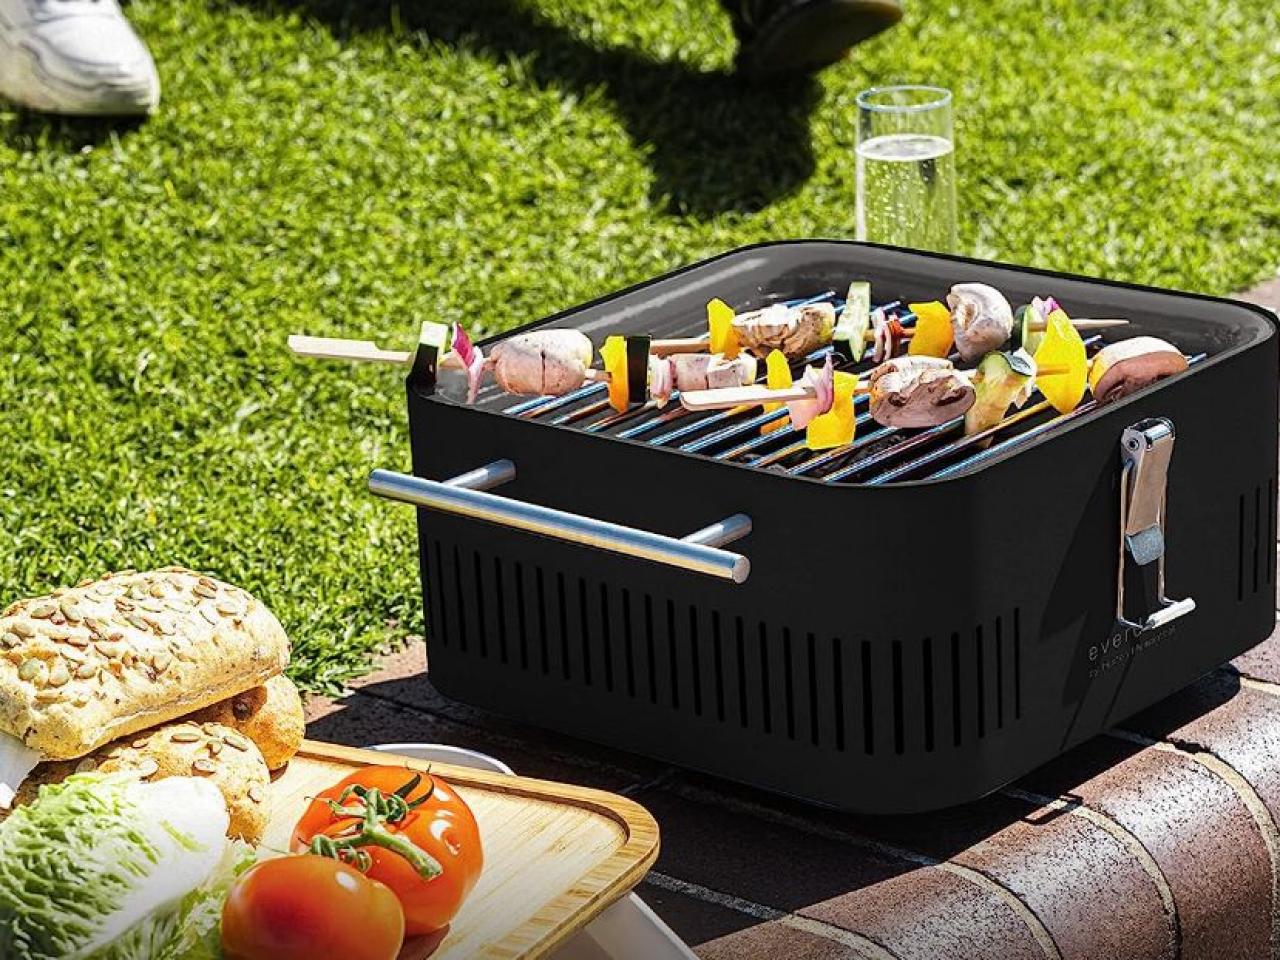 Tailgate in style with these cooking appliances - The Gadgeteer